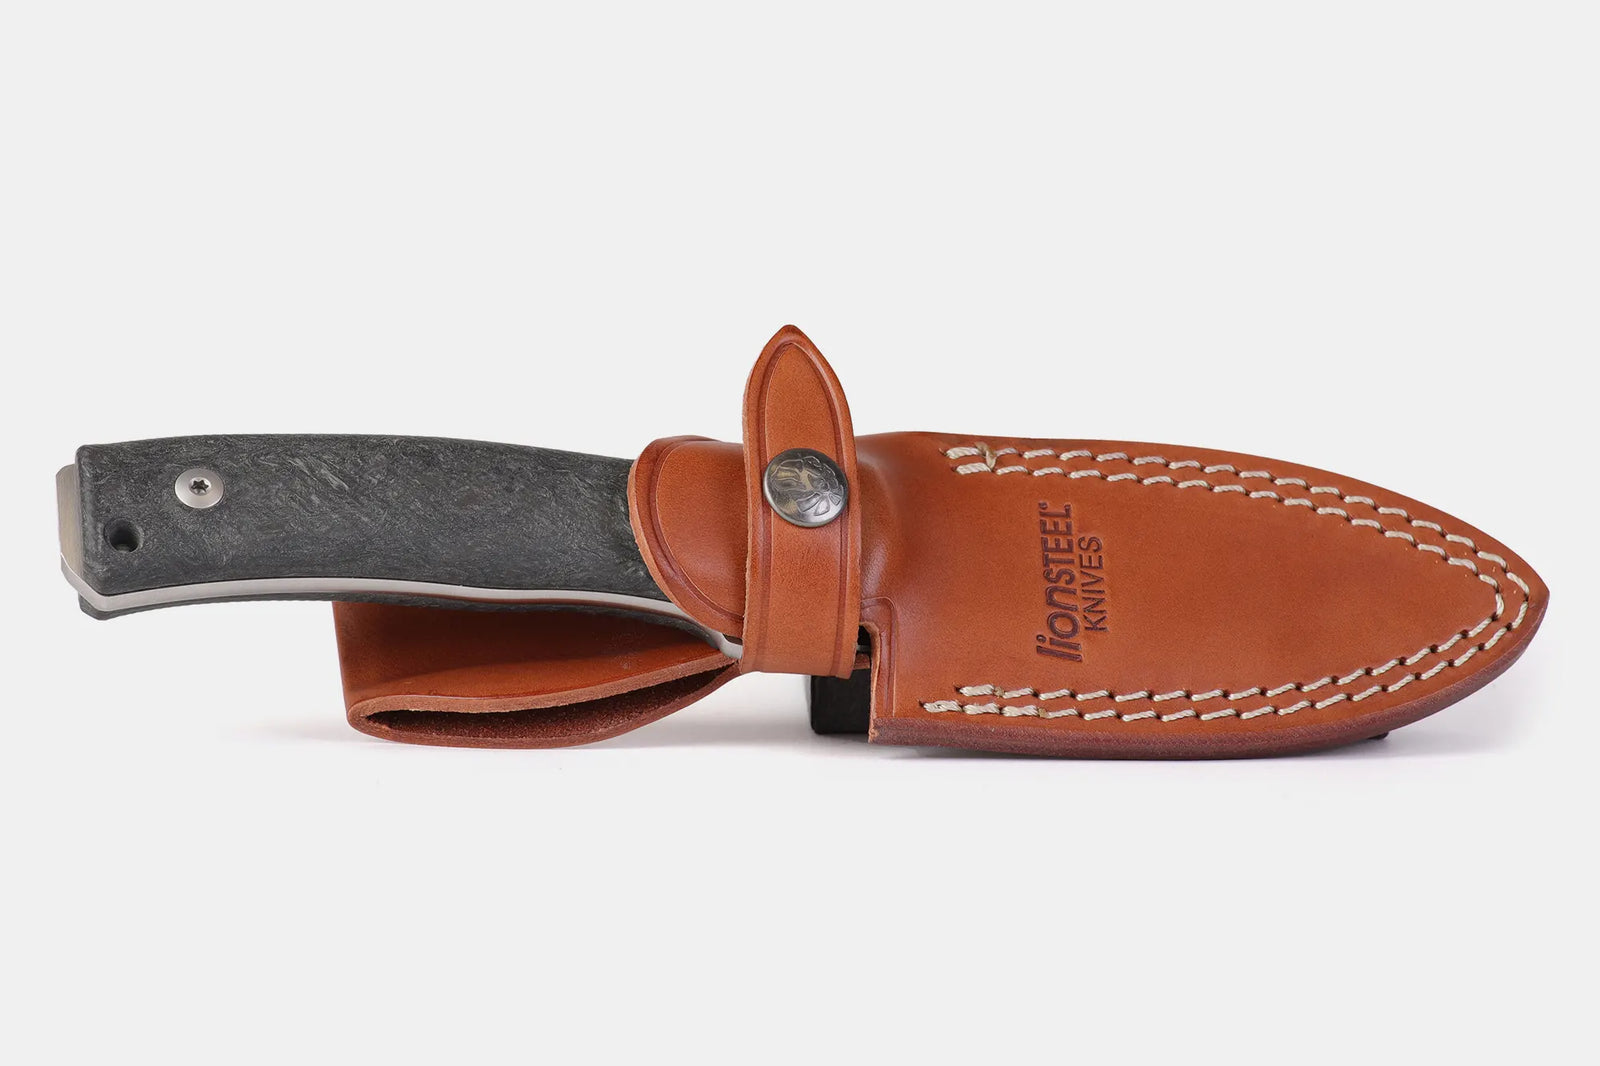 LionSTEEL M4 Leather Sheath - Made in Italy for Fixed Blade Knife